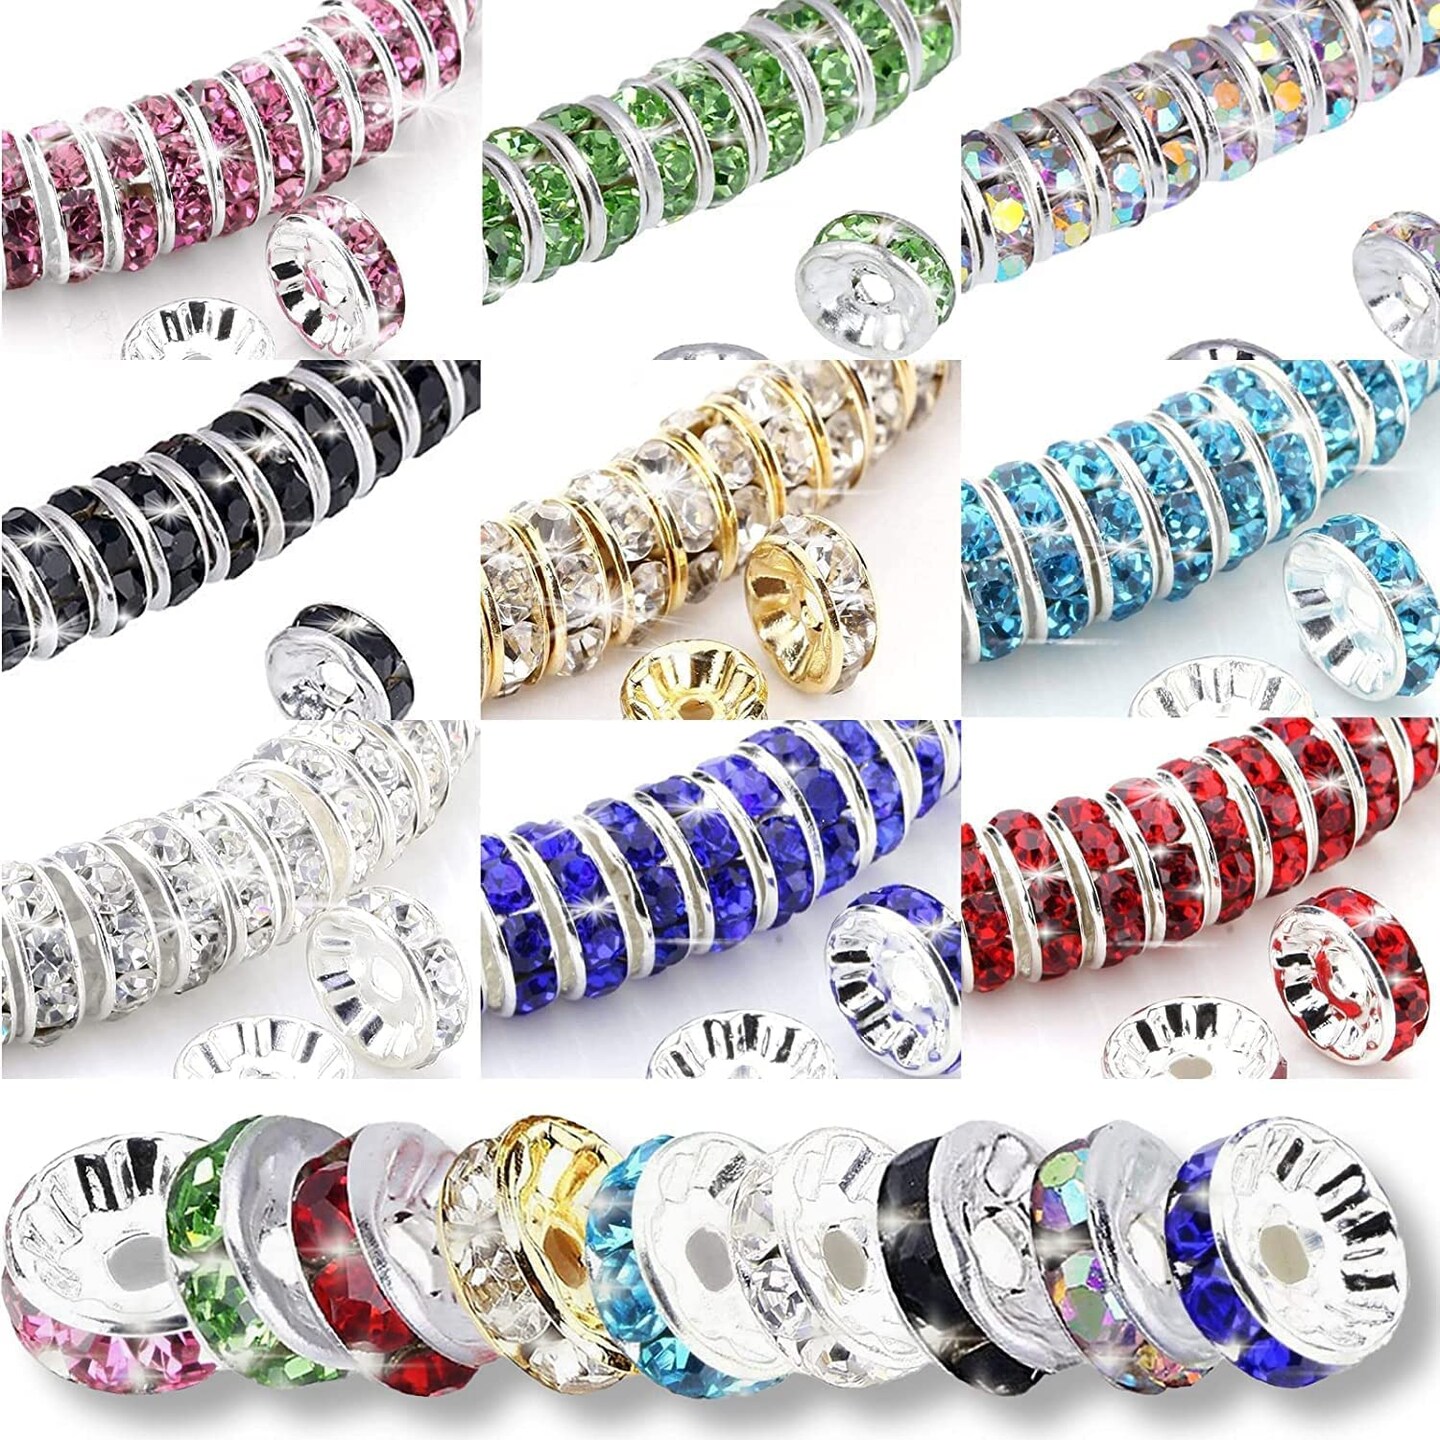 1080Pcs 8mm Rhinestone Spacer Beads, Crystal Glass Beads, Spacer